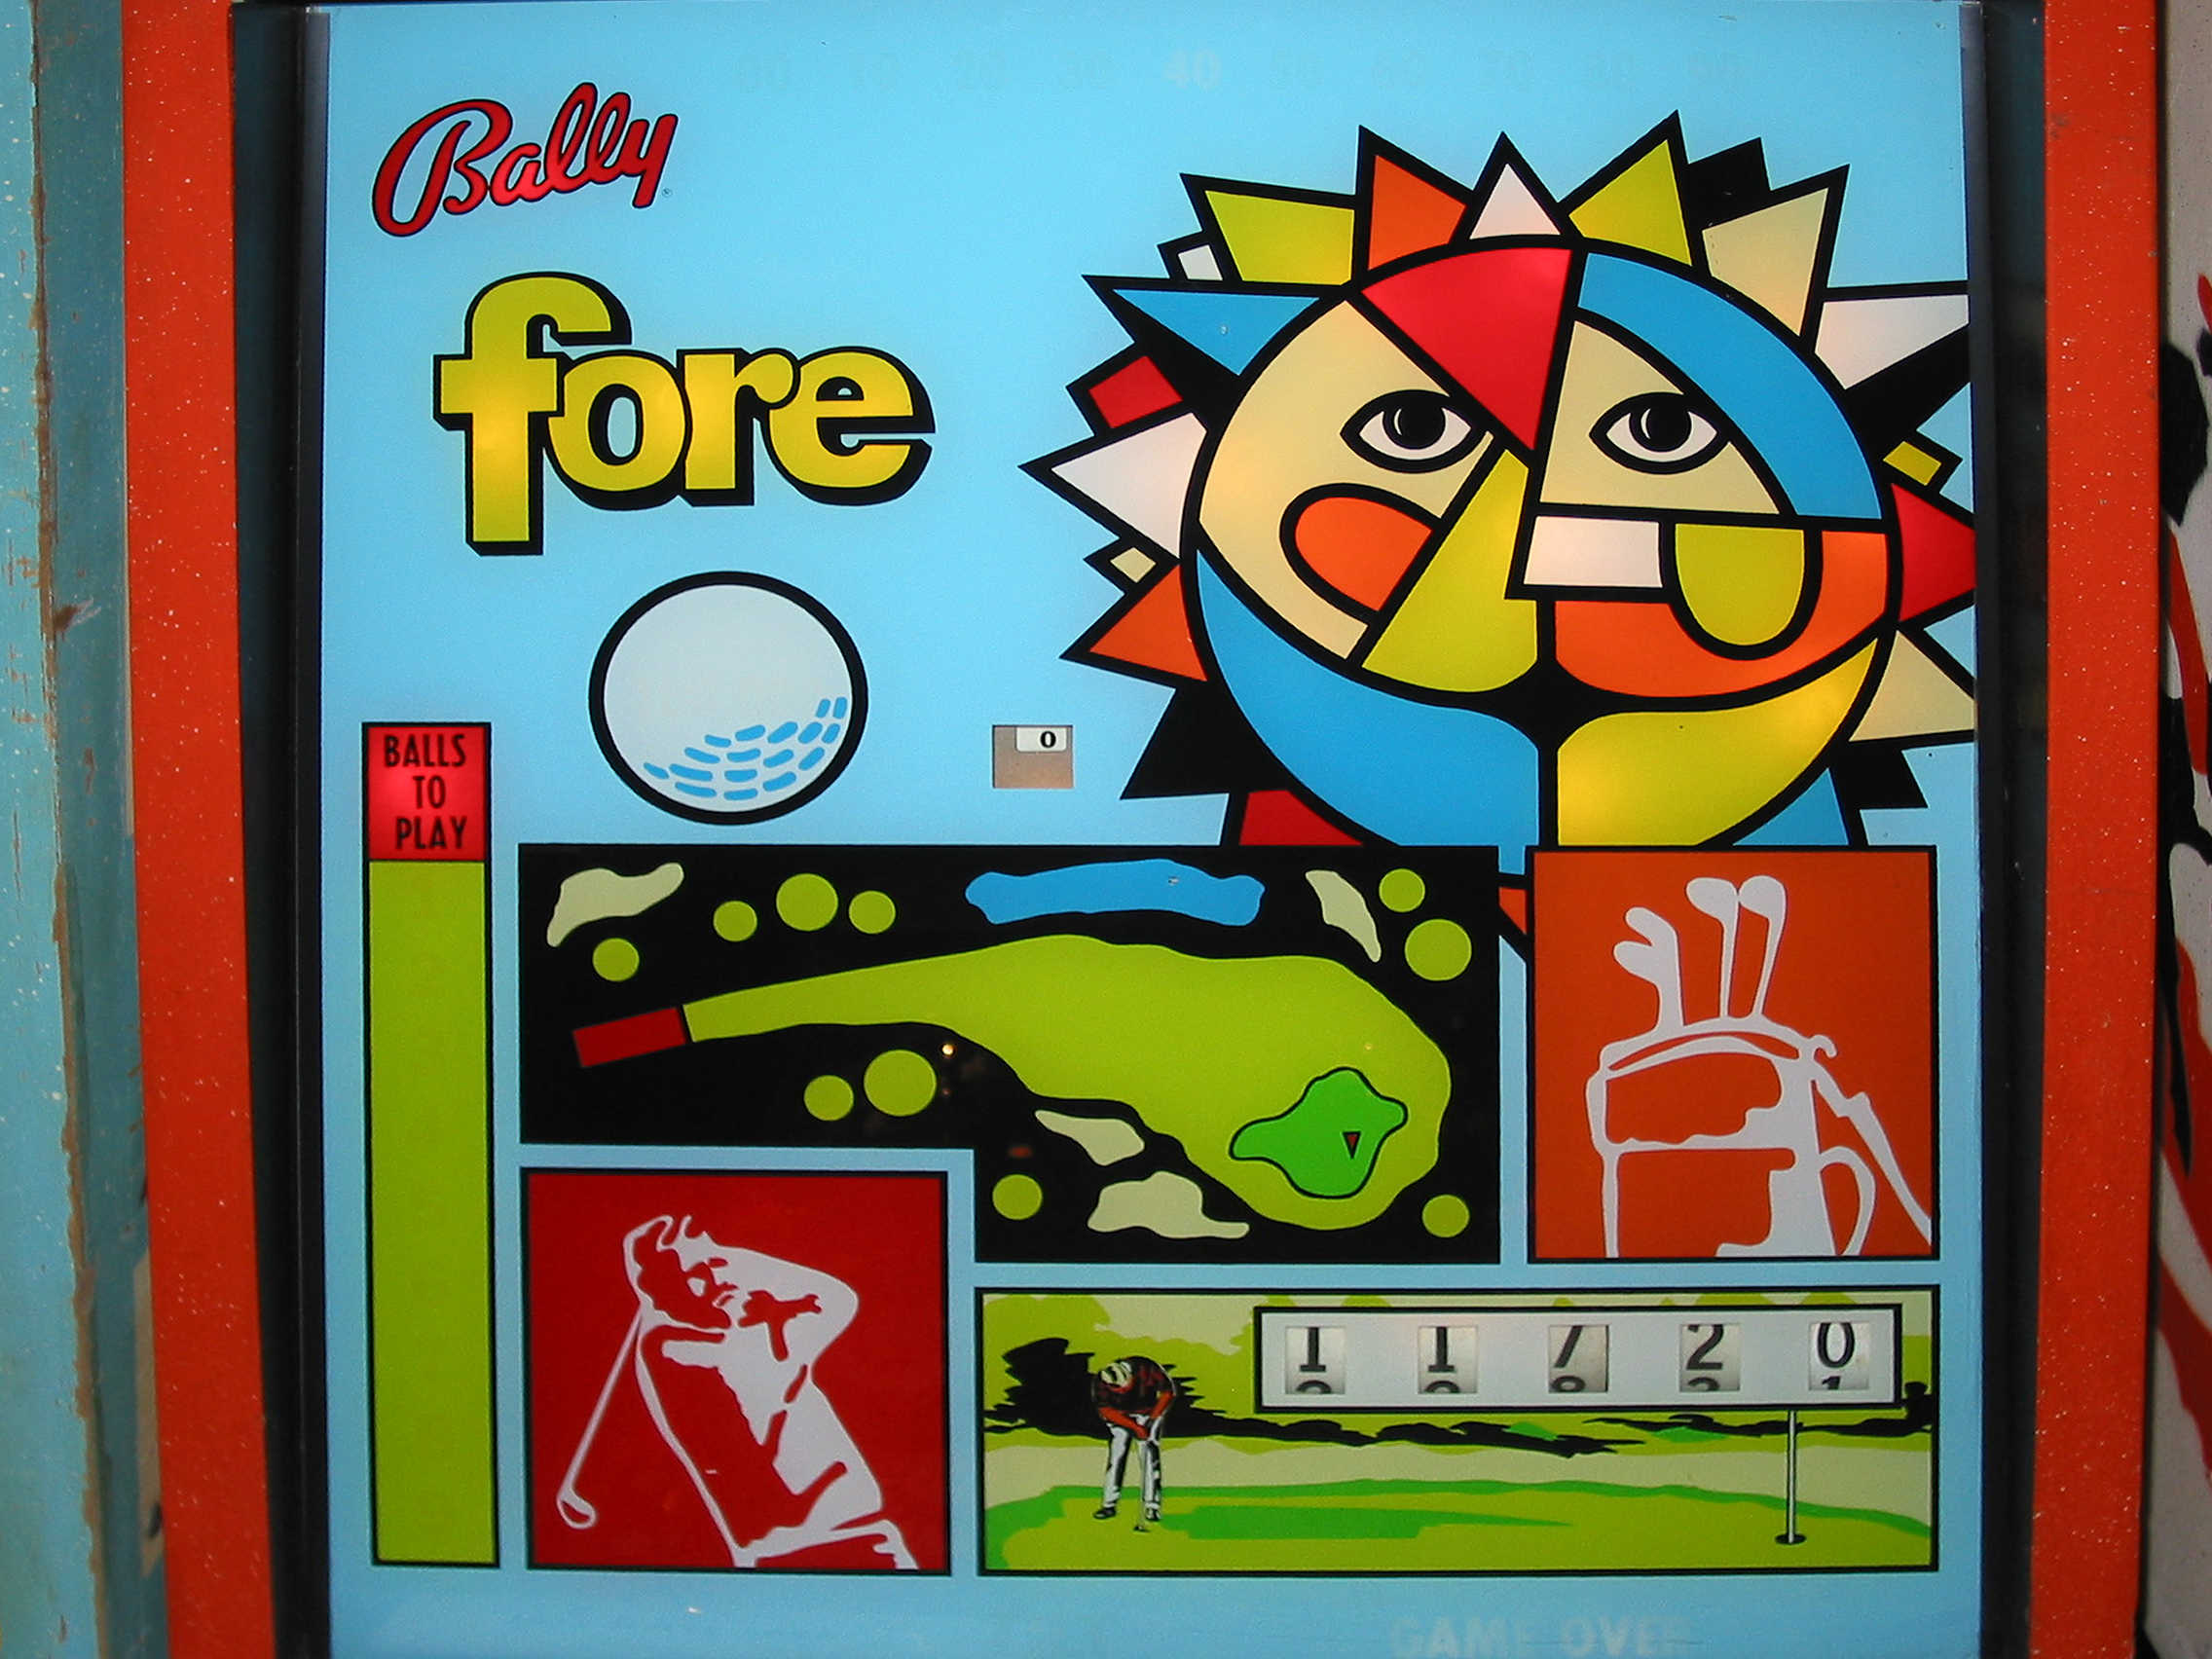 Fore (Bally, 1972) Backglass